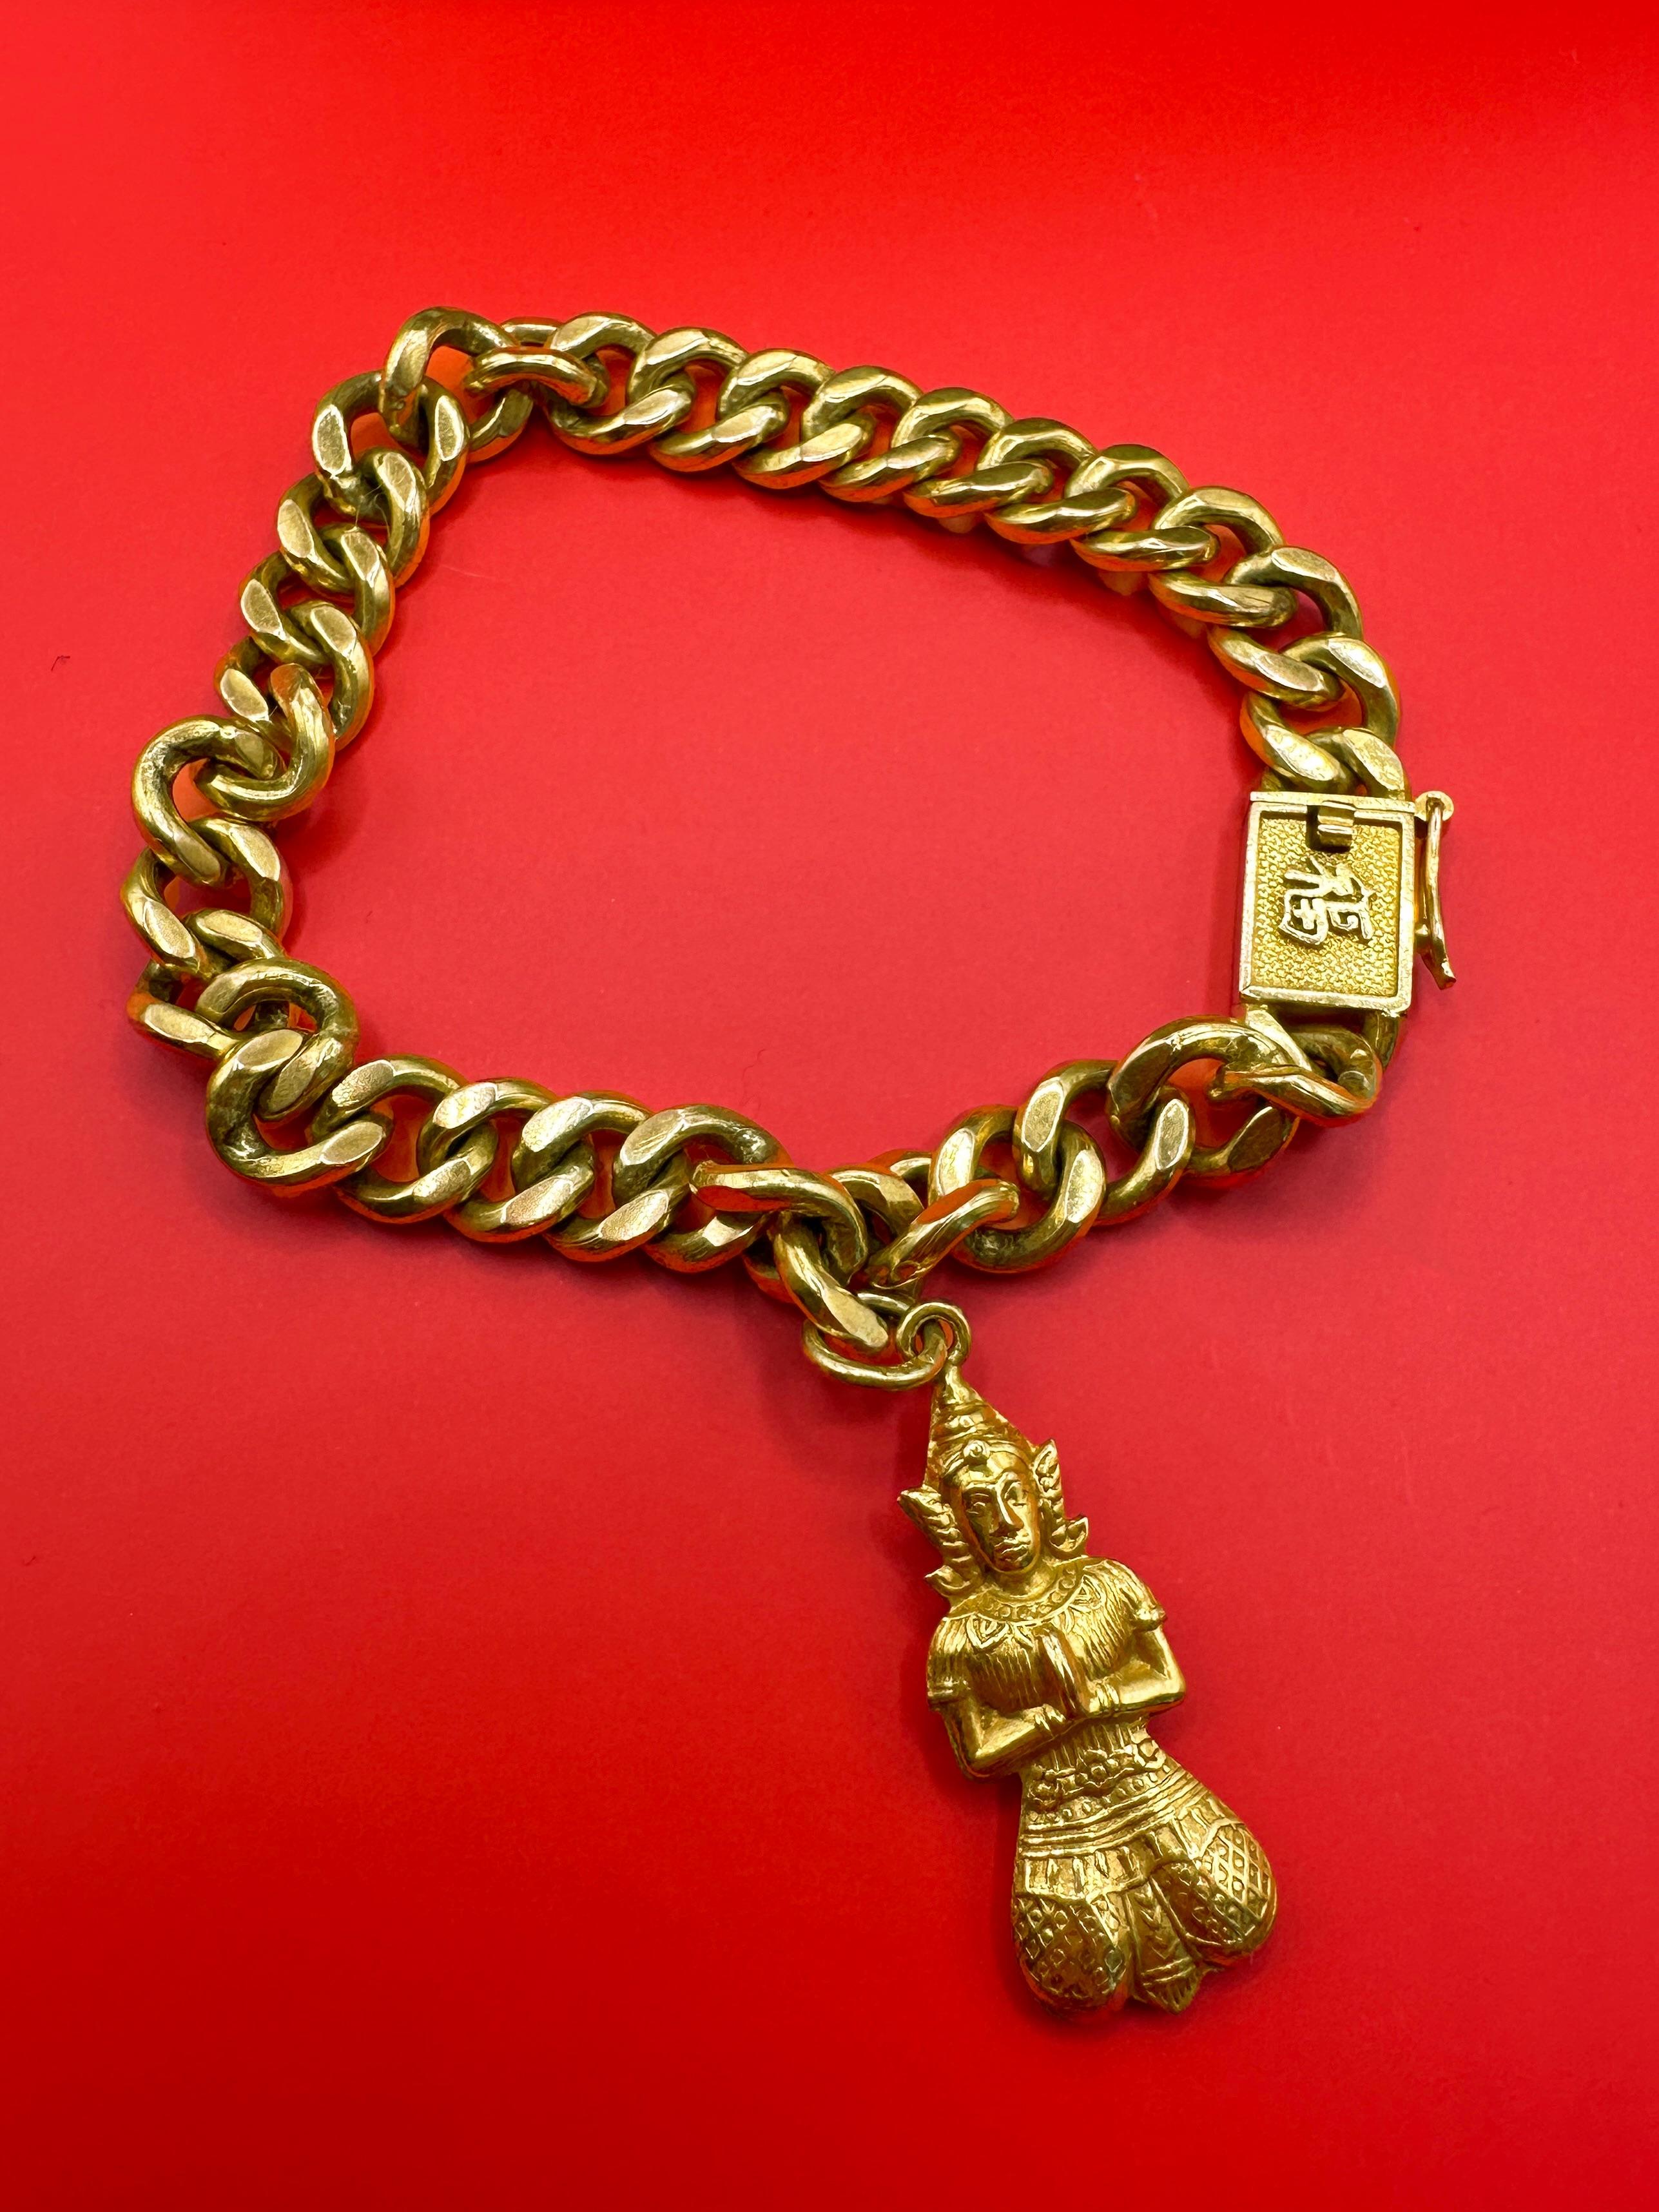 Manifest good fortune with this stunning 14k Good Fortune Bracelet featuring a Chinese character. Made of 14k yellow gold, this vintage piece is in great condition and weighs 28.3 grams. Embrace luck and style with this 7 inch beauty.

14k Good